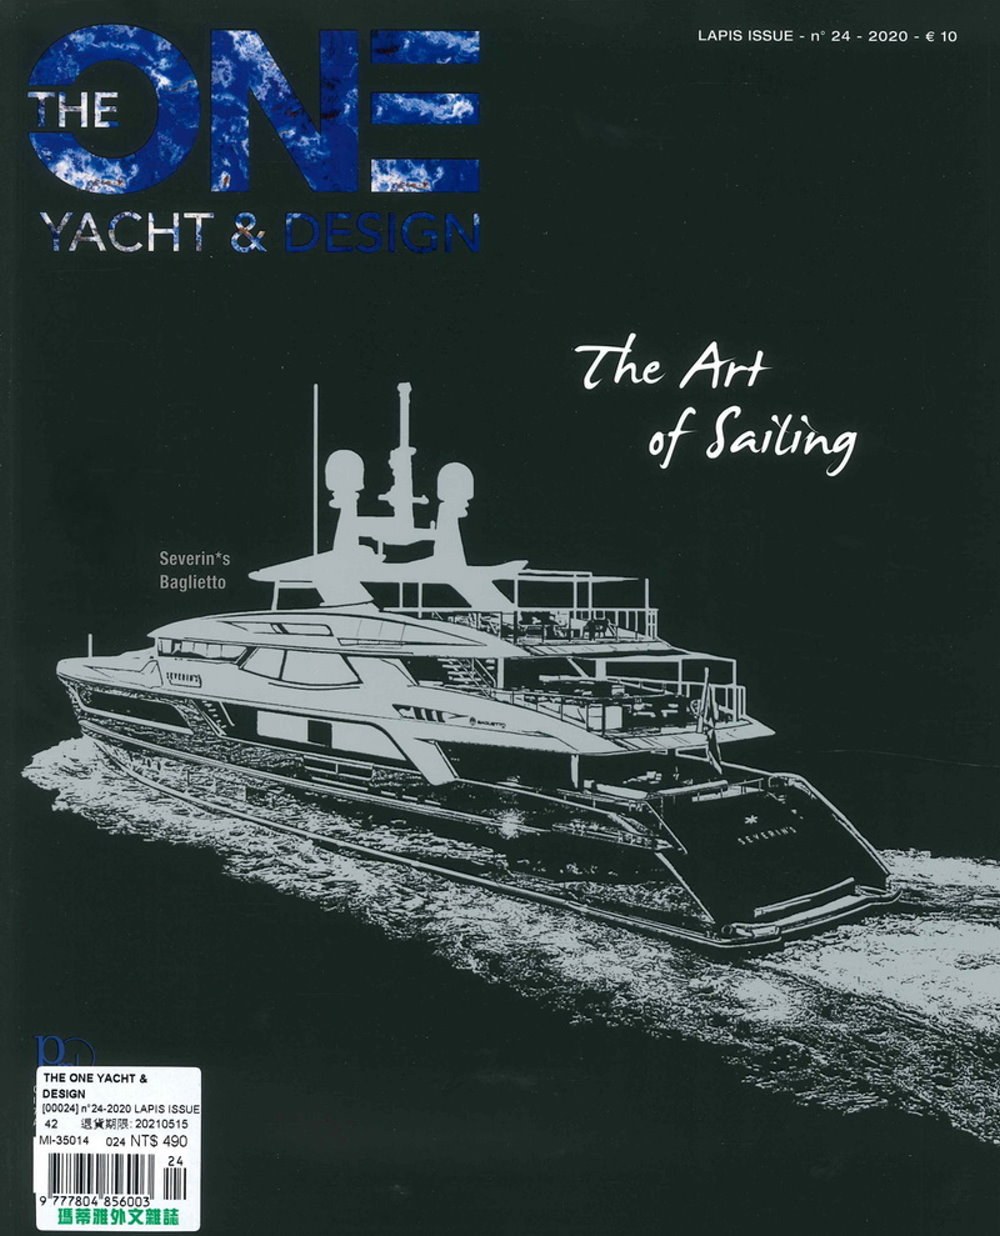 THE ONE YACHT & DESIGN 第24期/2020 LAPIS ISSUE